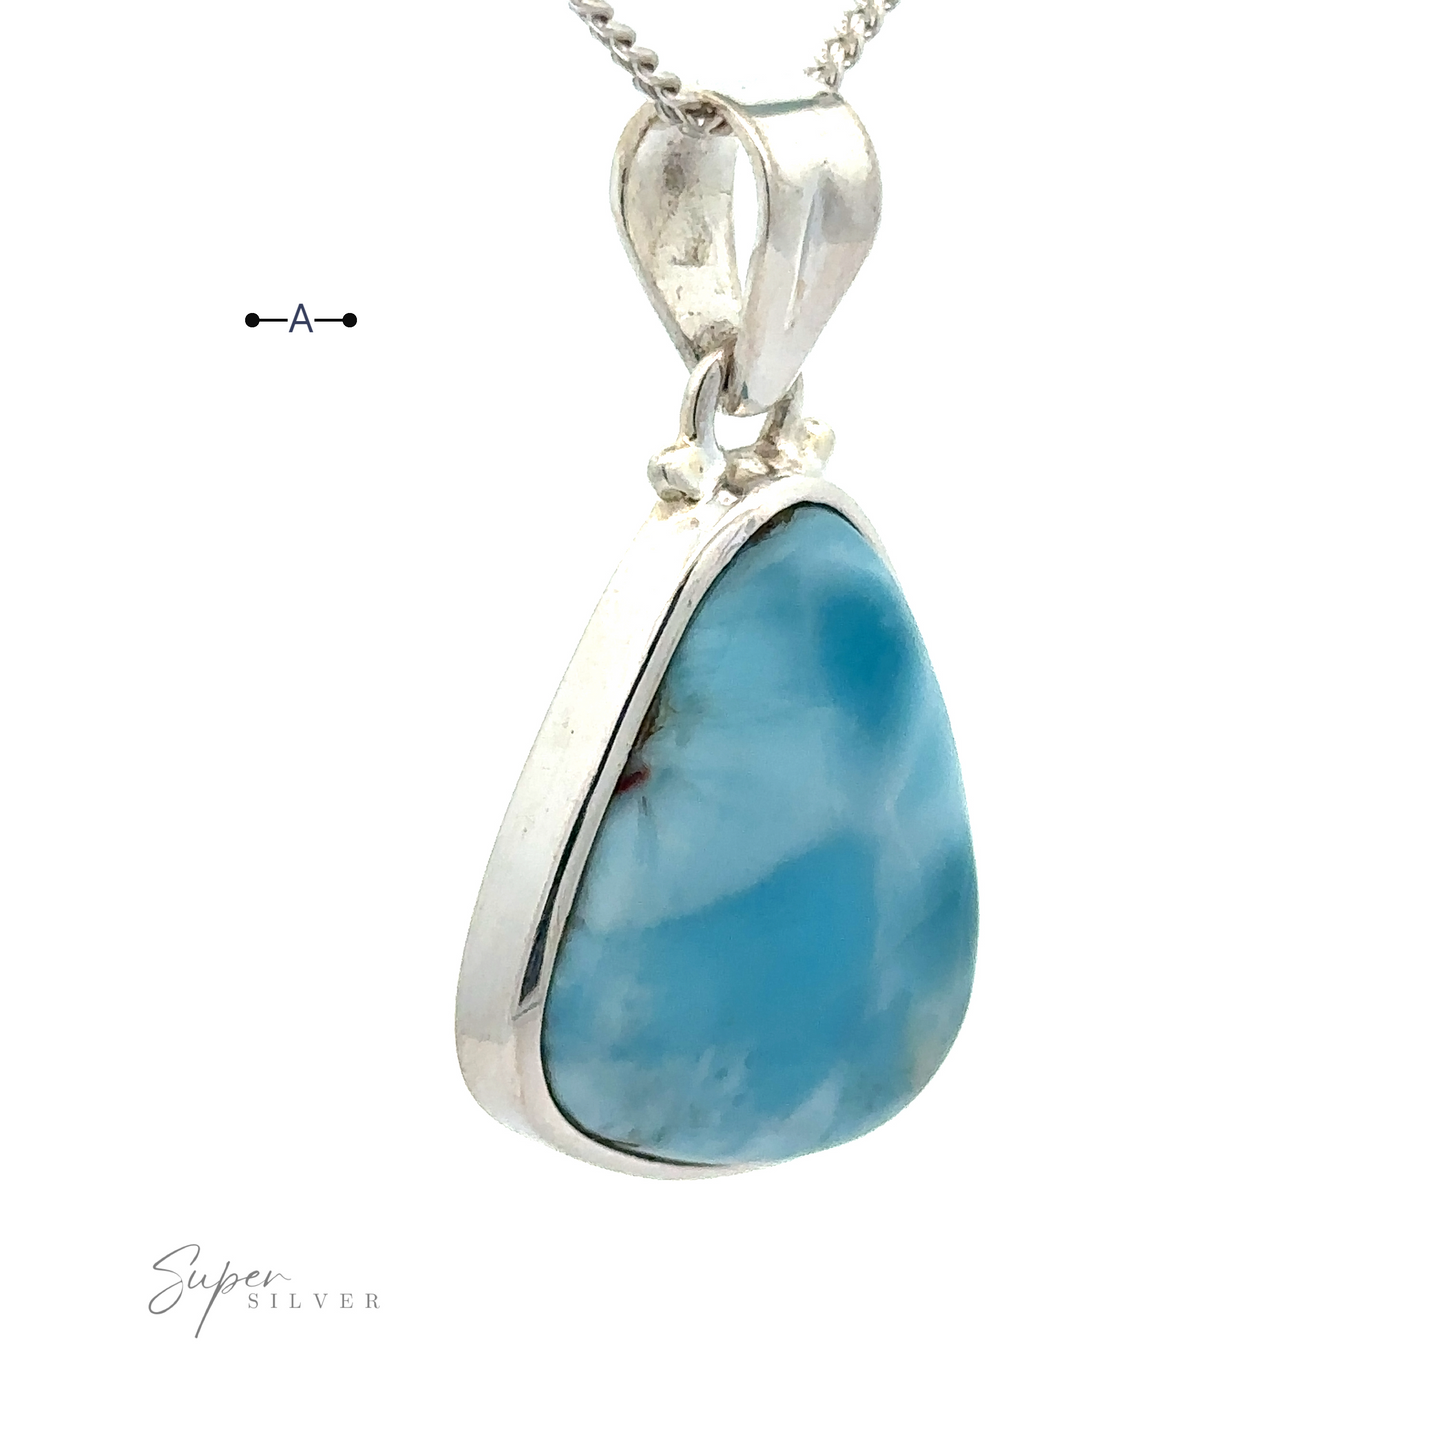 
                  
                    A teardrop-shaped Freeform Shape Larimar Pendants set in sterling silver with a silver chain. The background is white, and the text "Super Silver" is seen on the bottom left.
                  
                